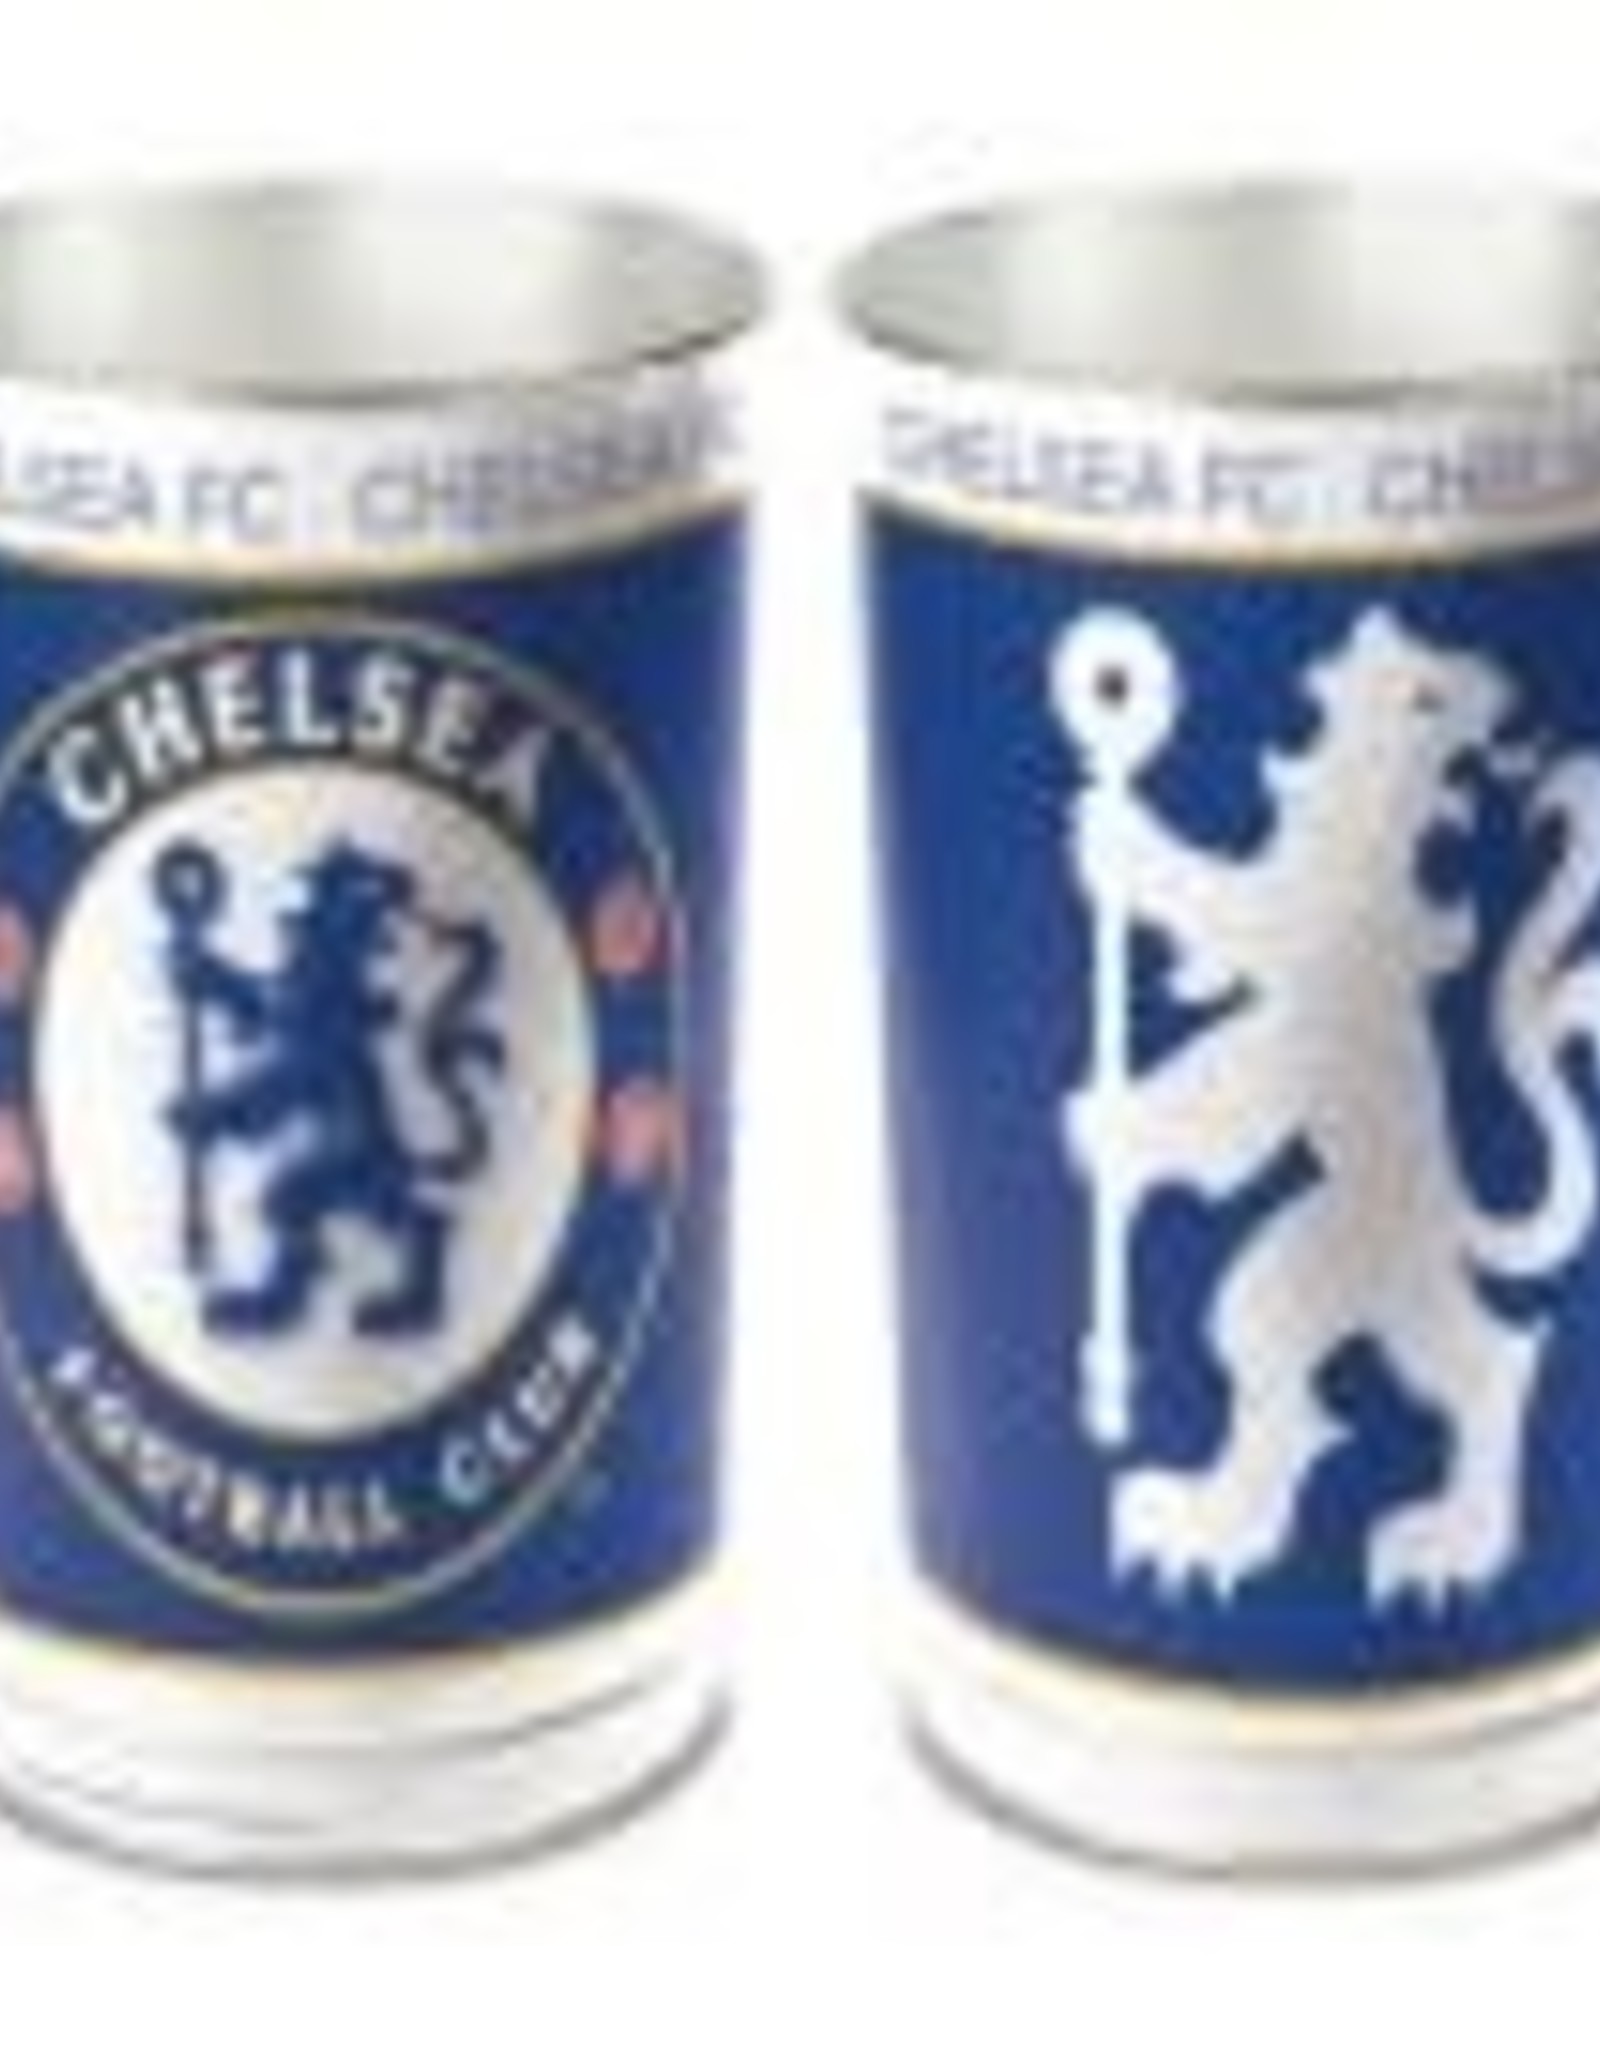 Chelsea FC Waste Can